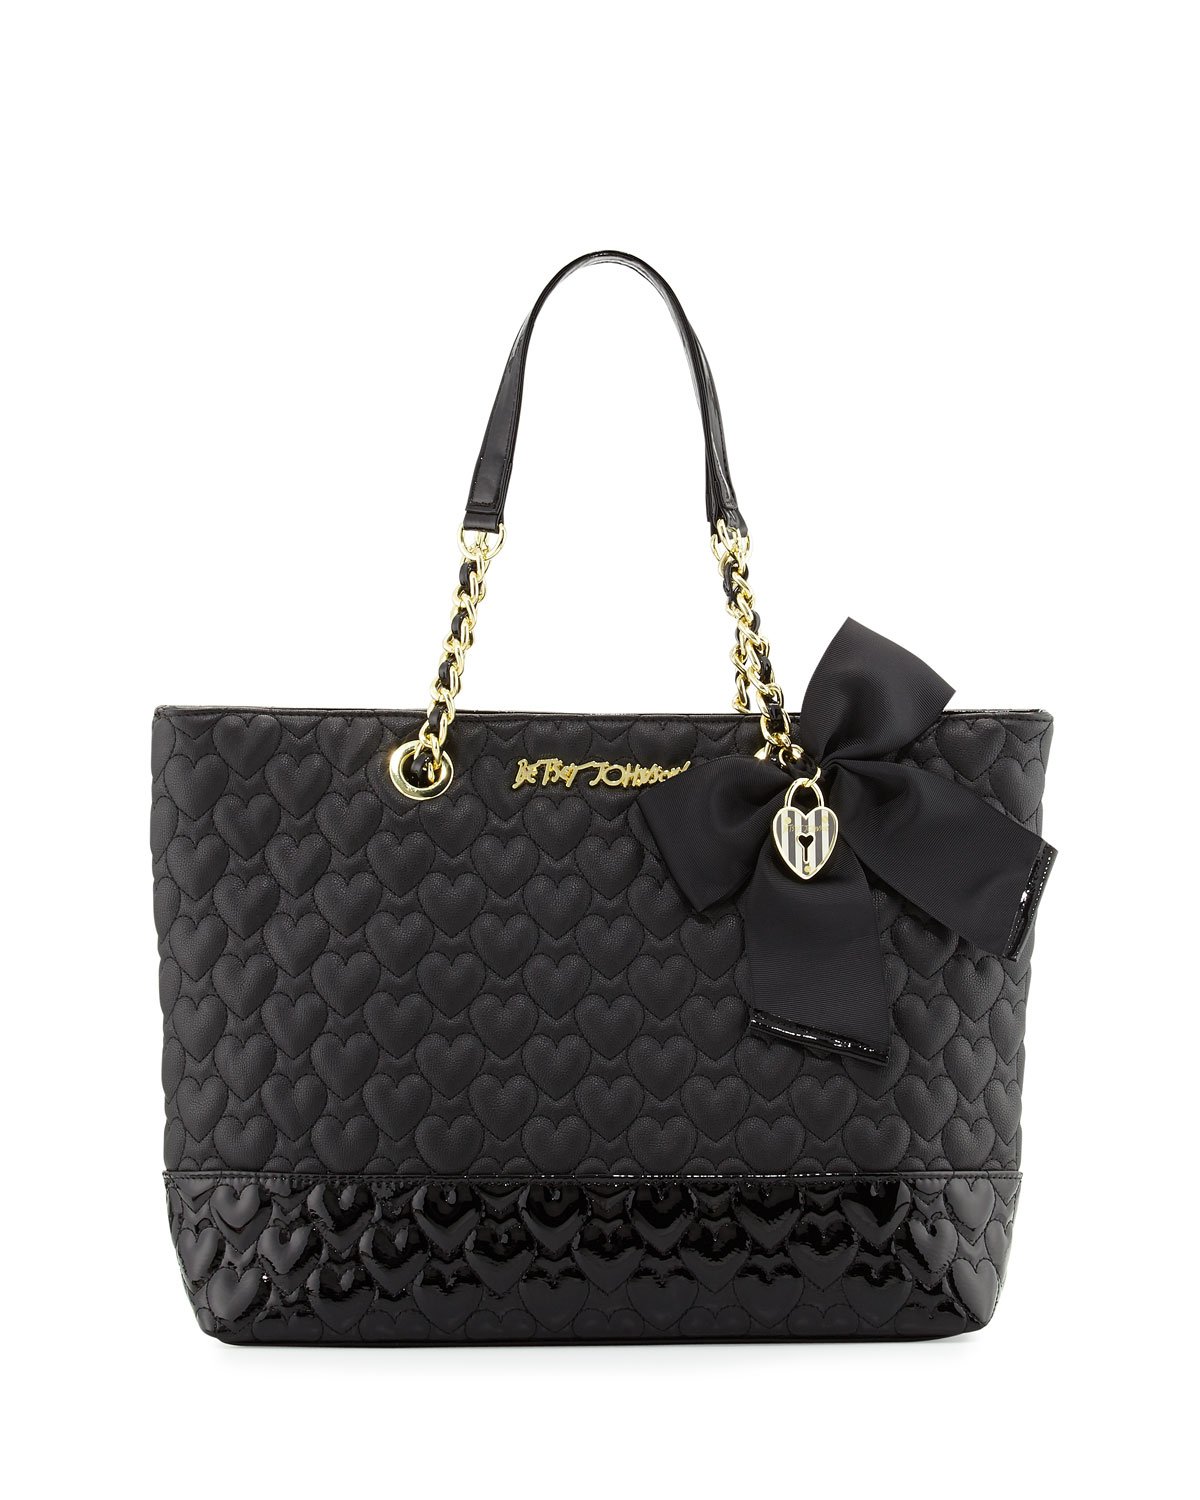 Betsey johnson Be Mine Quilted Tote Bag in Black | Lyst